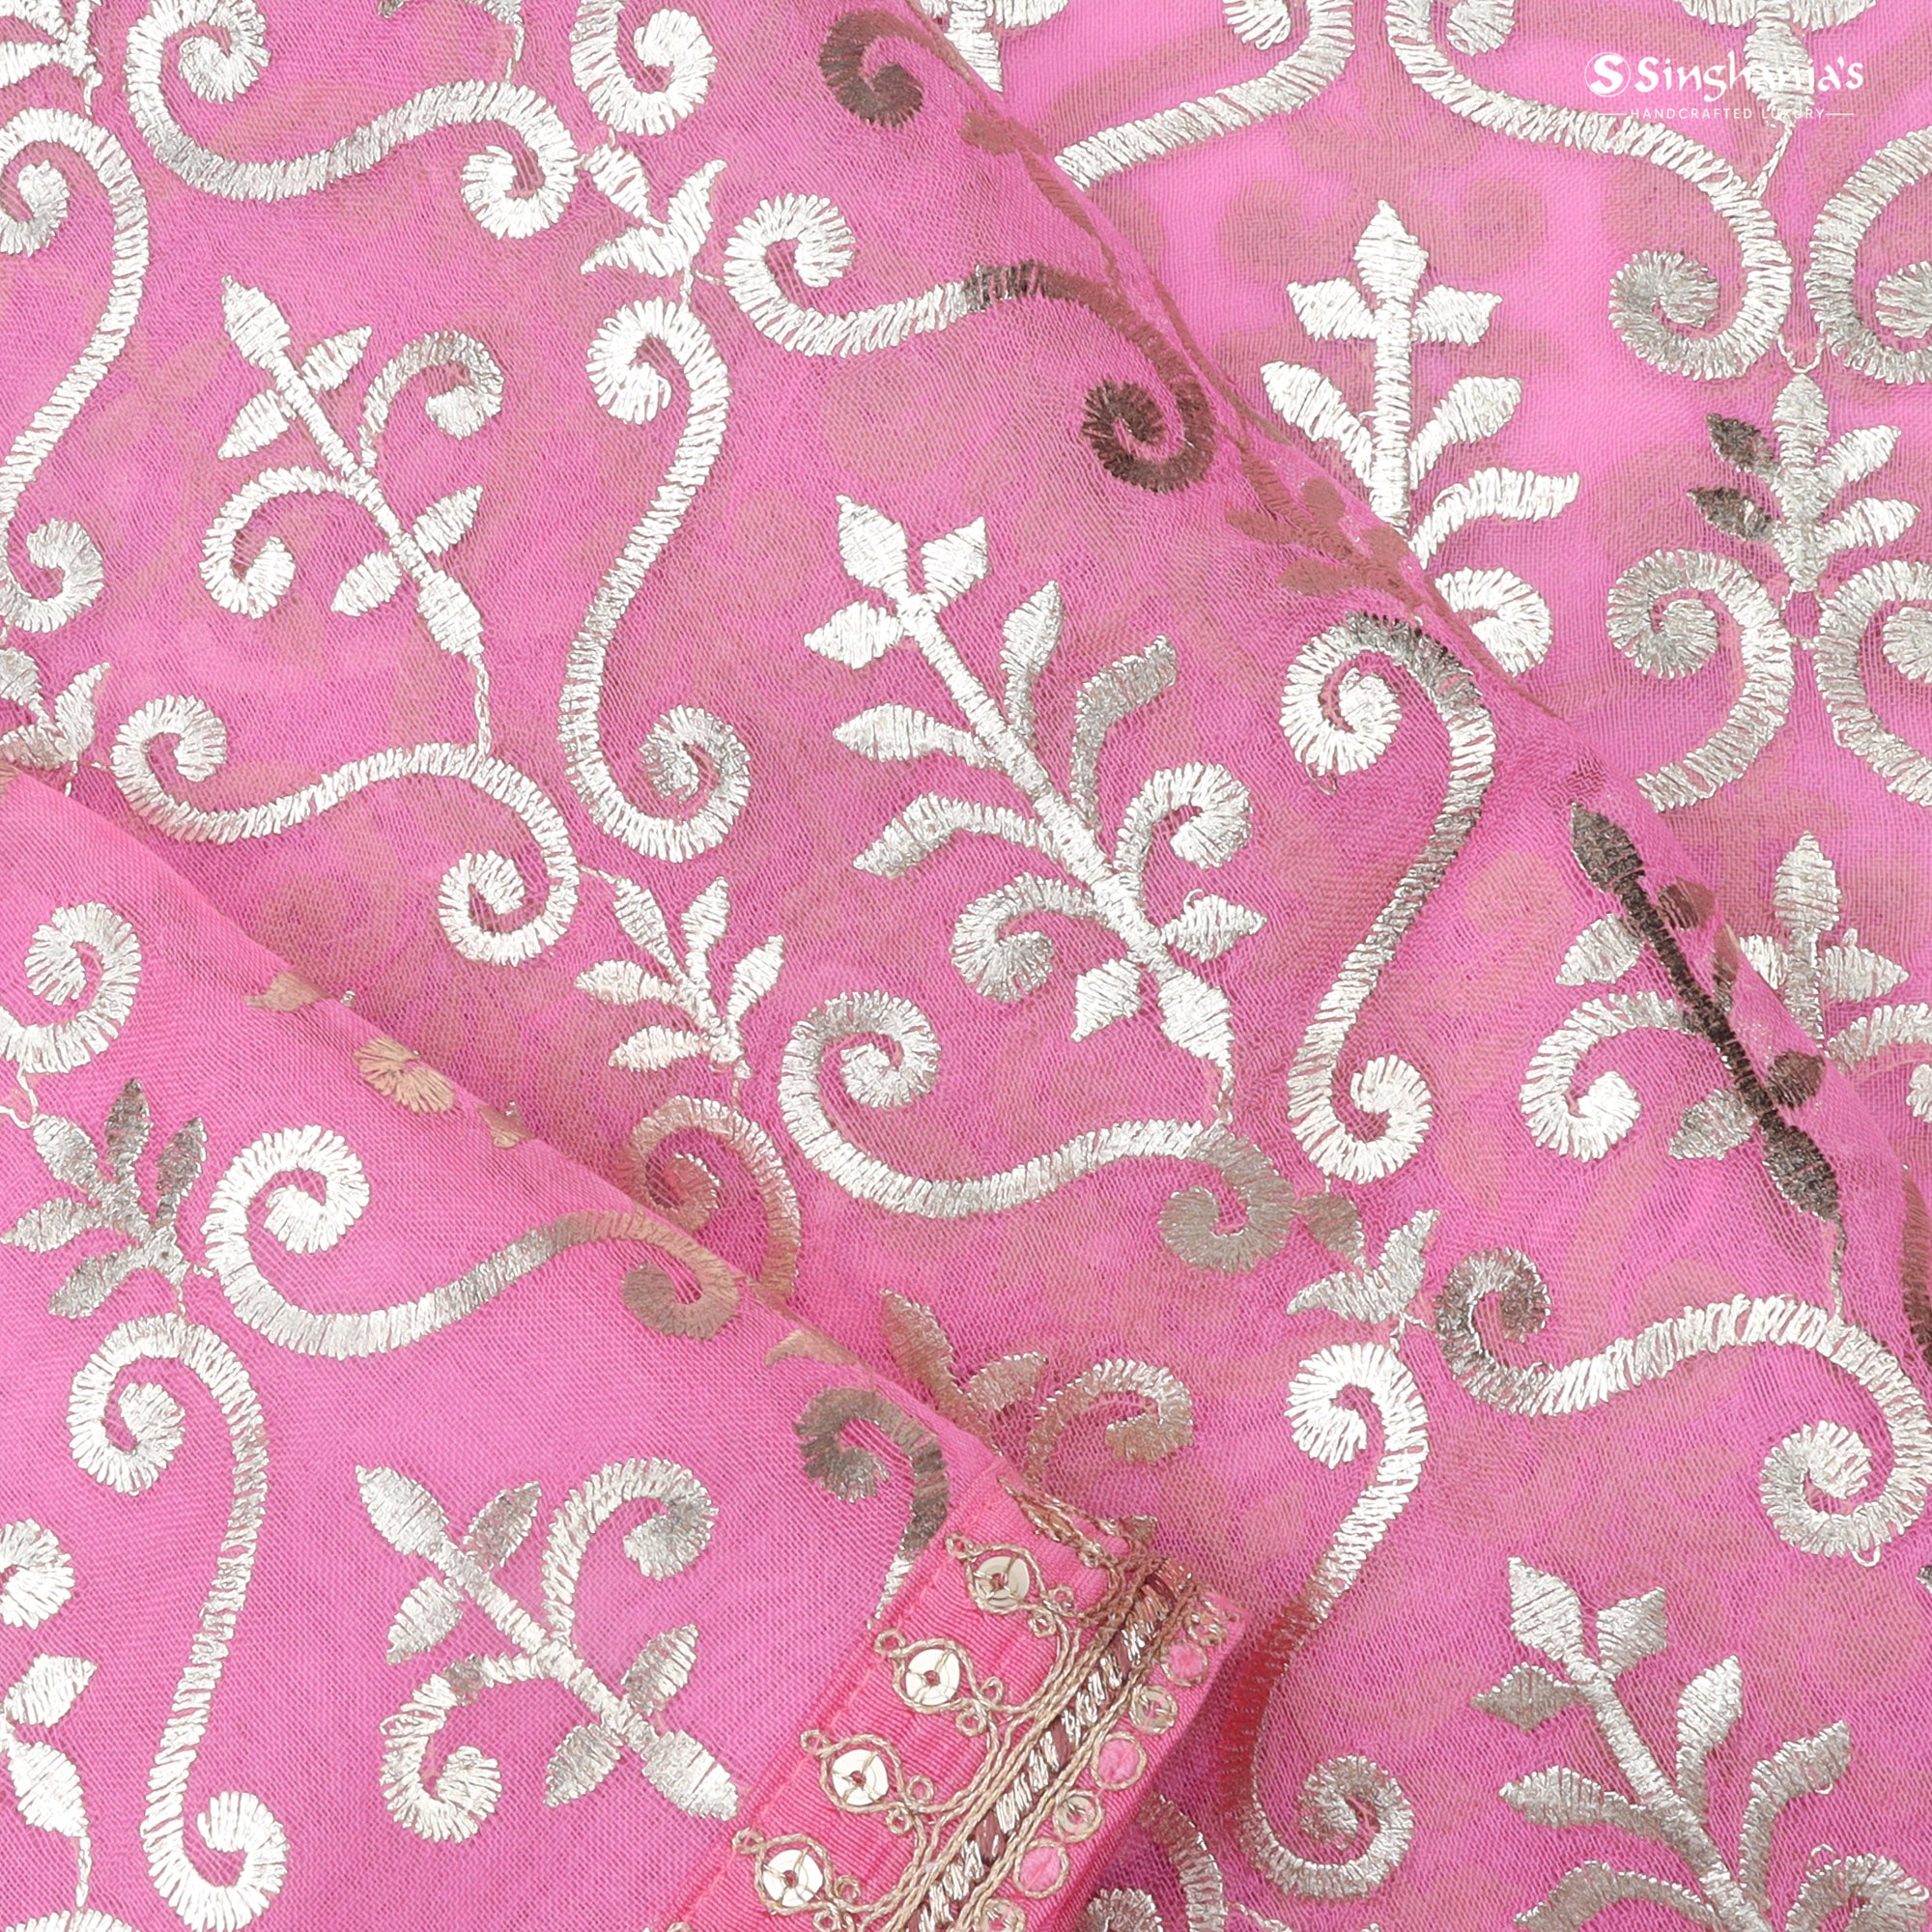 Bubblegum Pink Organza Saree With Sequin Embroidery